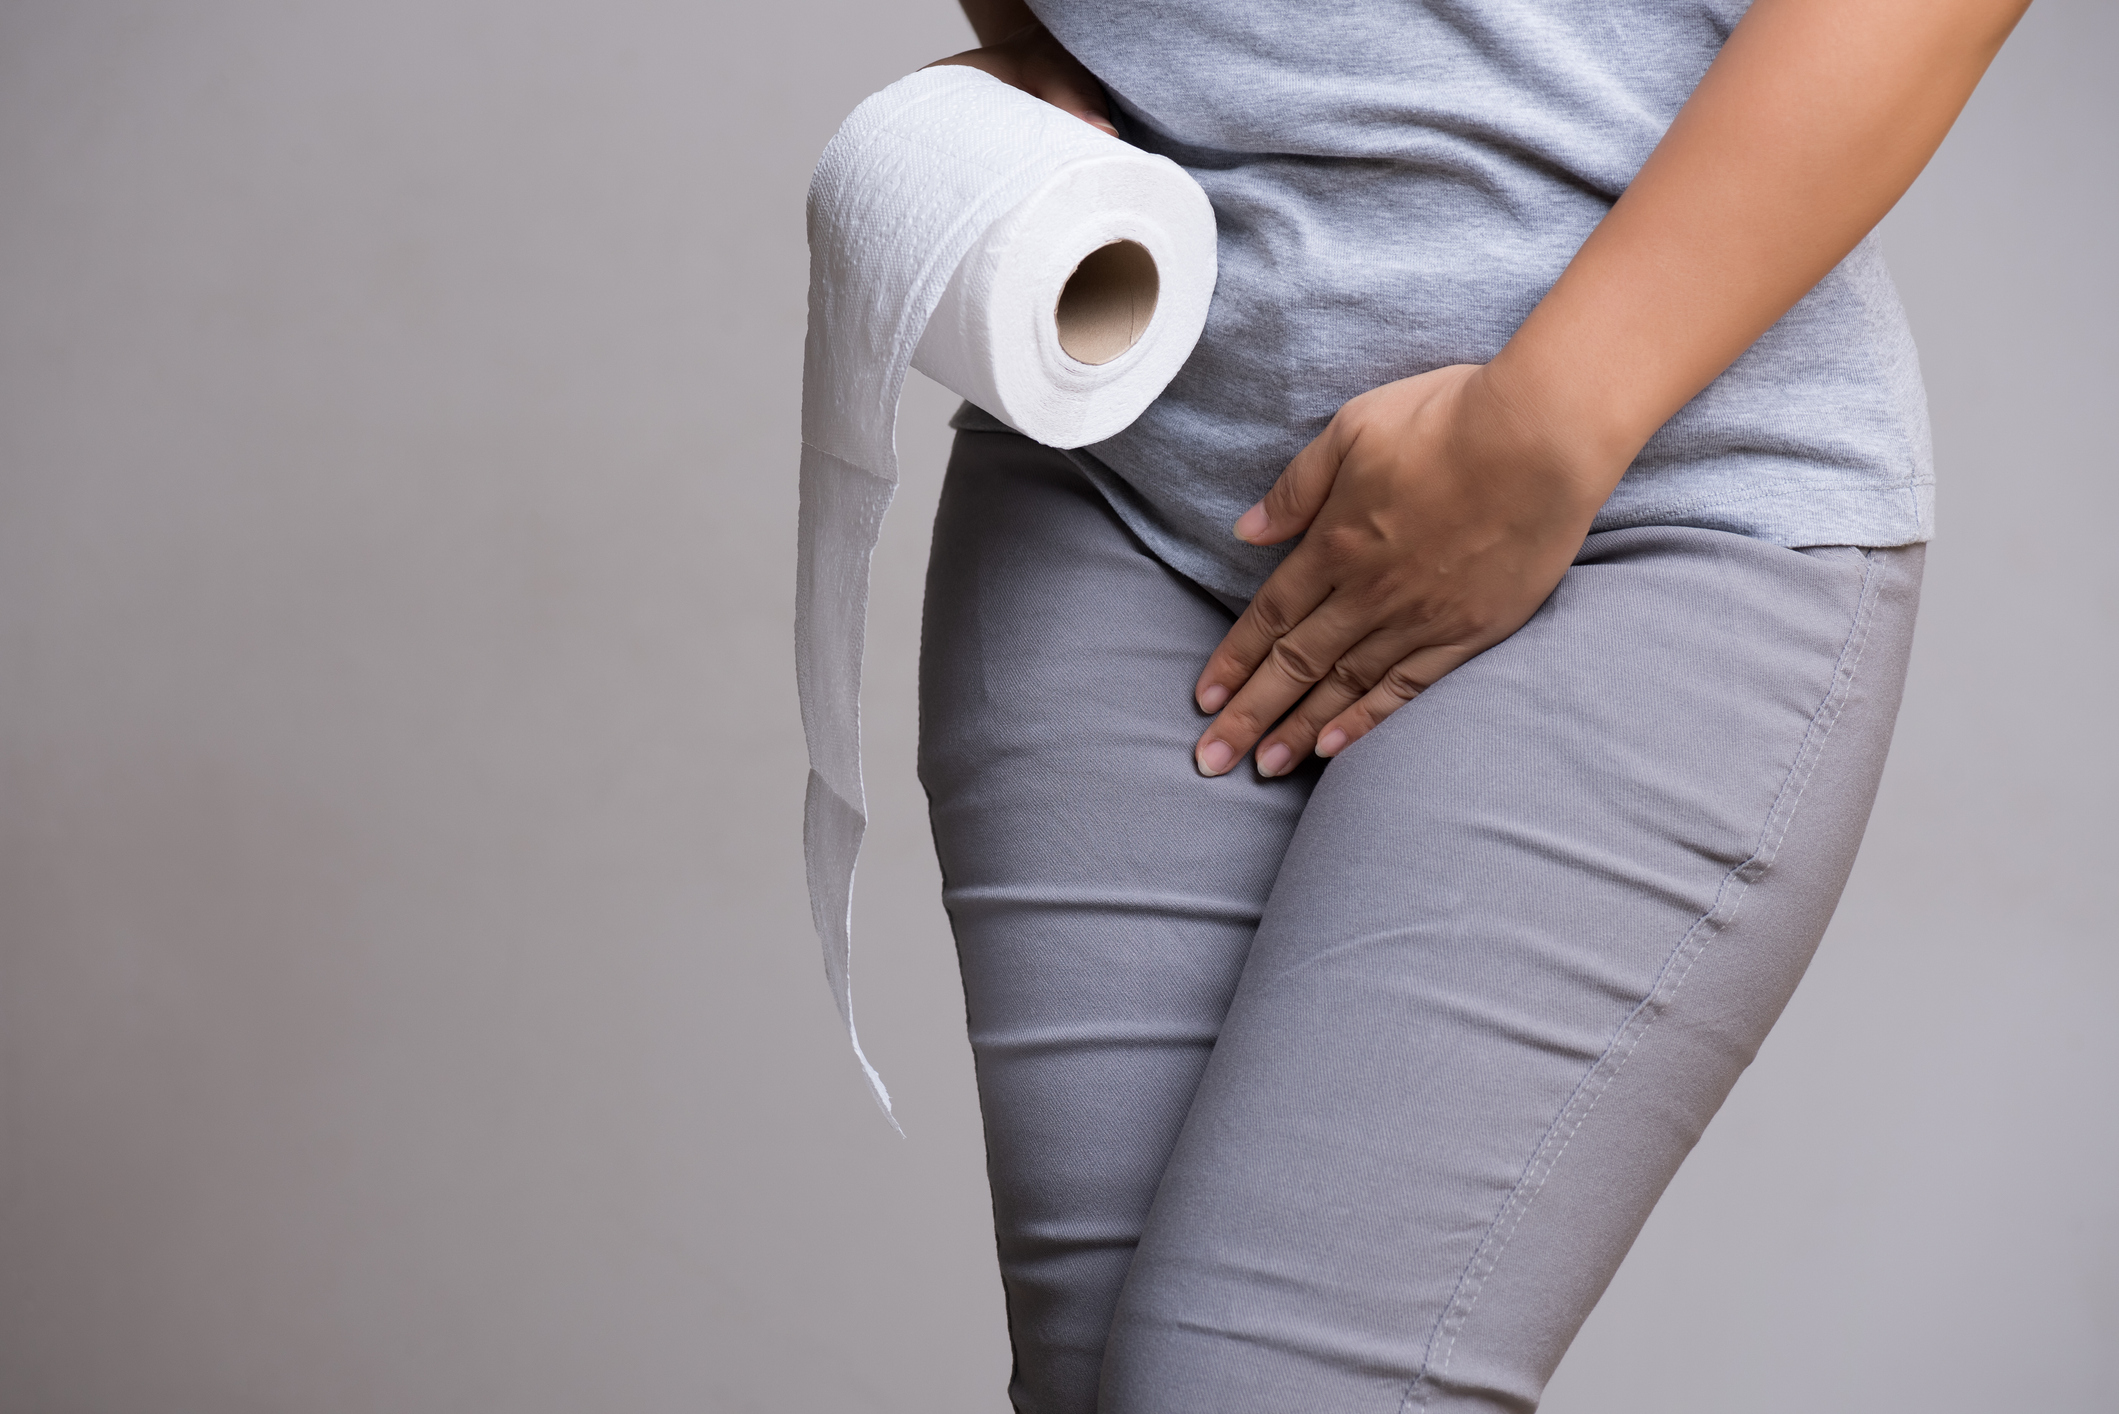 Why Is Urine Leaking When I Cough?